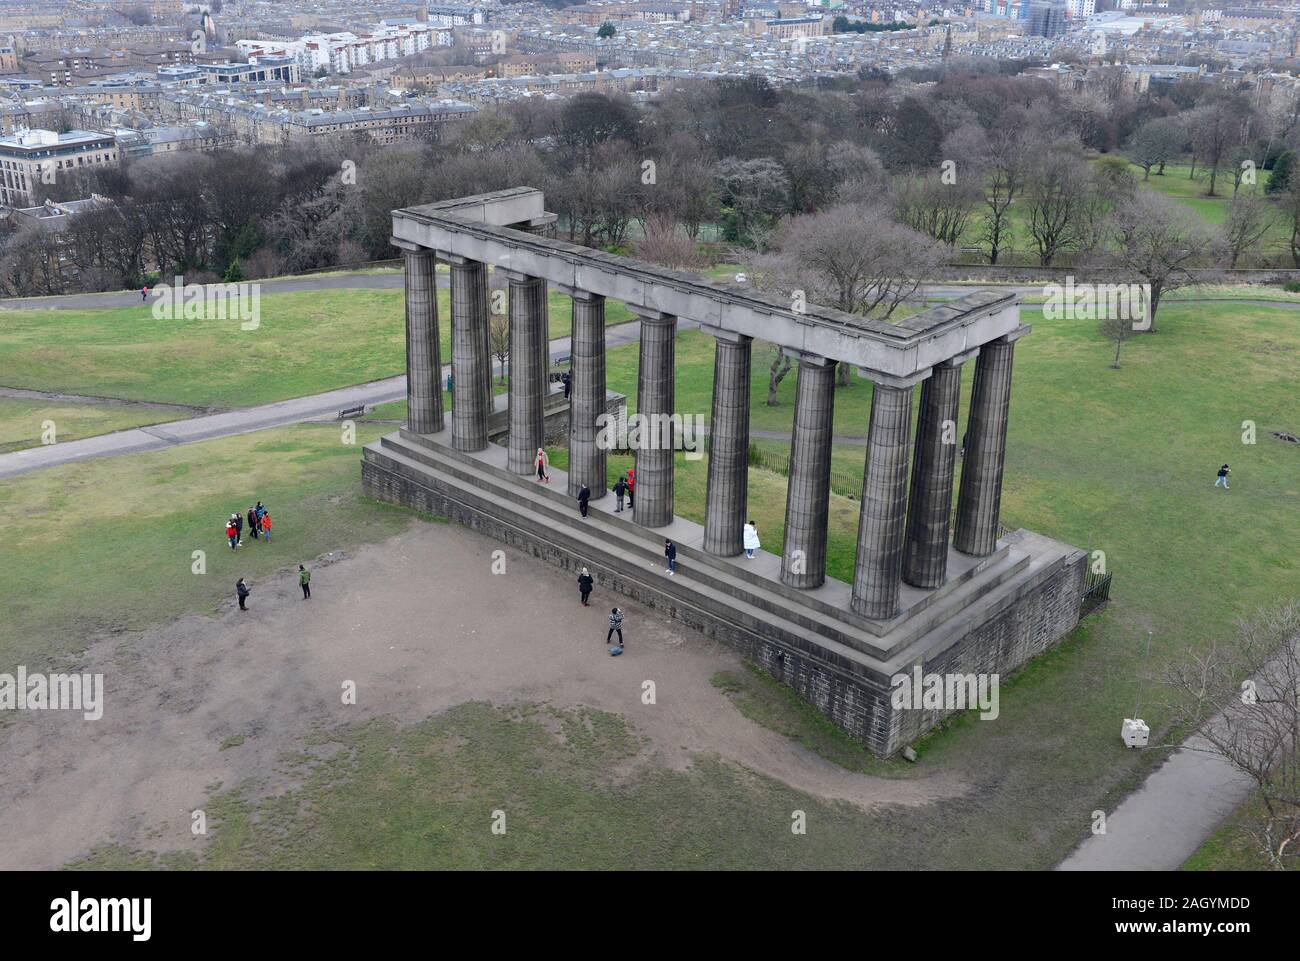 Scotland's National Monument on Calton Hill, Edinburgh, on a very overcast and dull day in mid-December. It's modeled on the Parthenon in Athens. Stock Photo